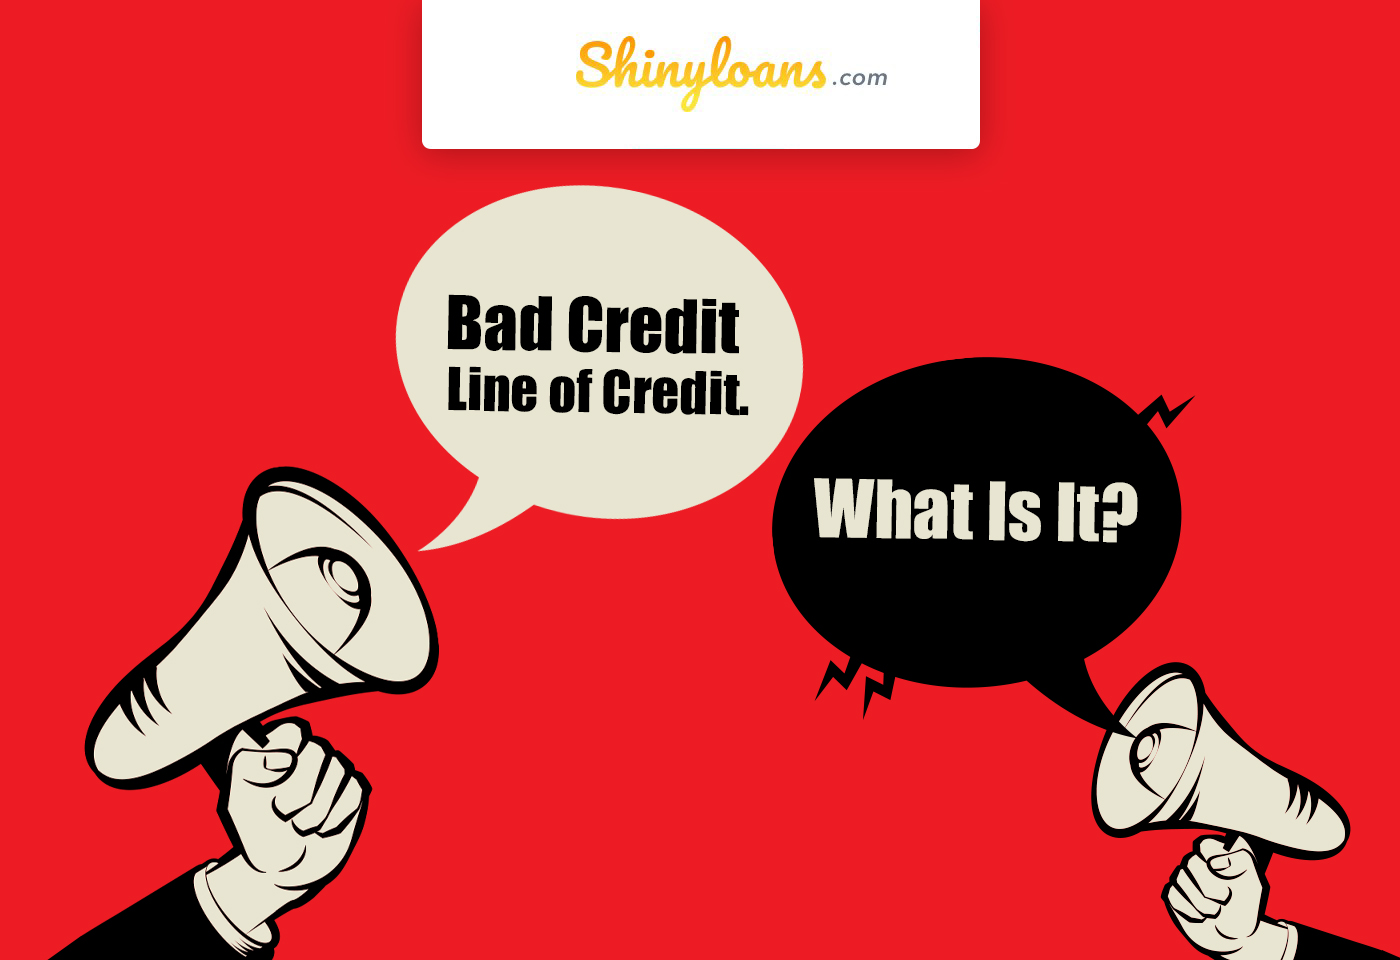 Bad Credit Line of Credit: What Is It?